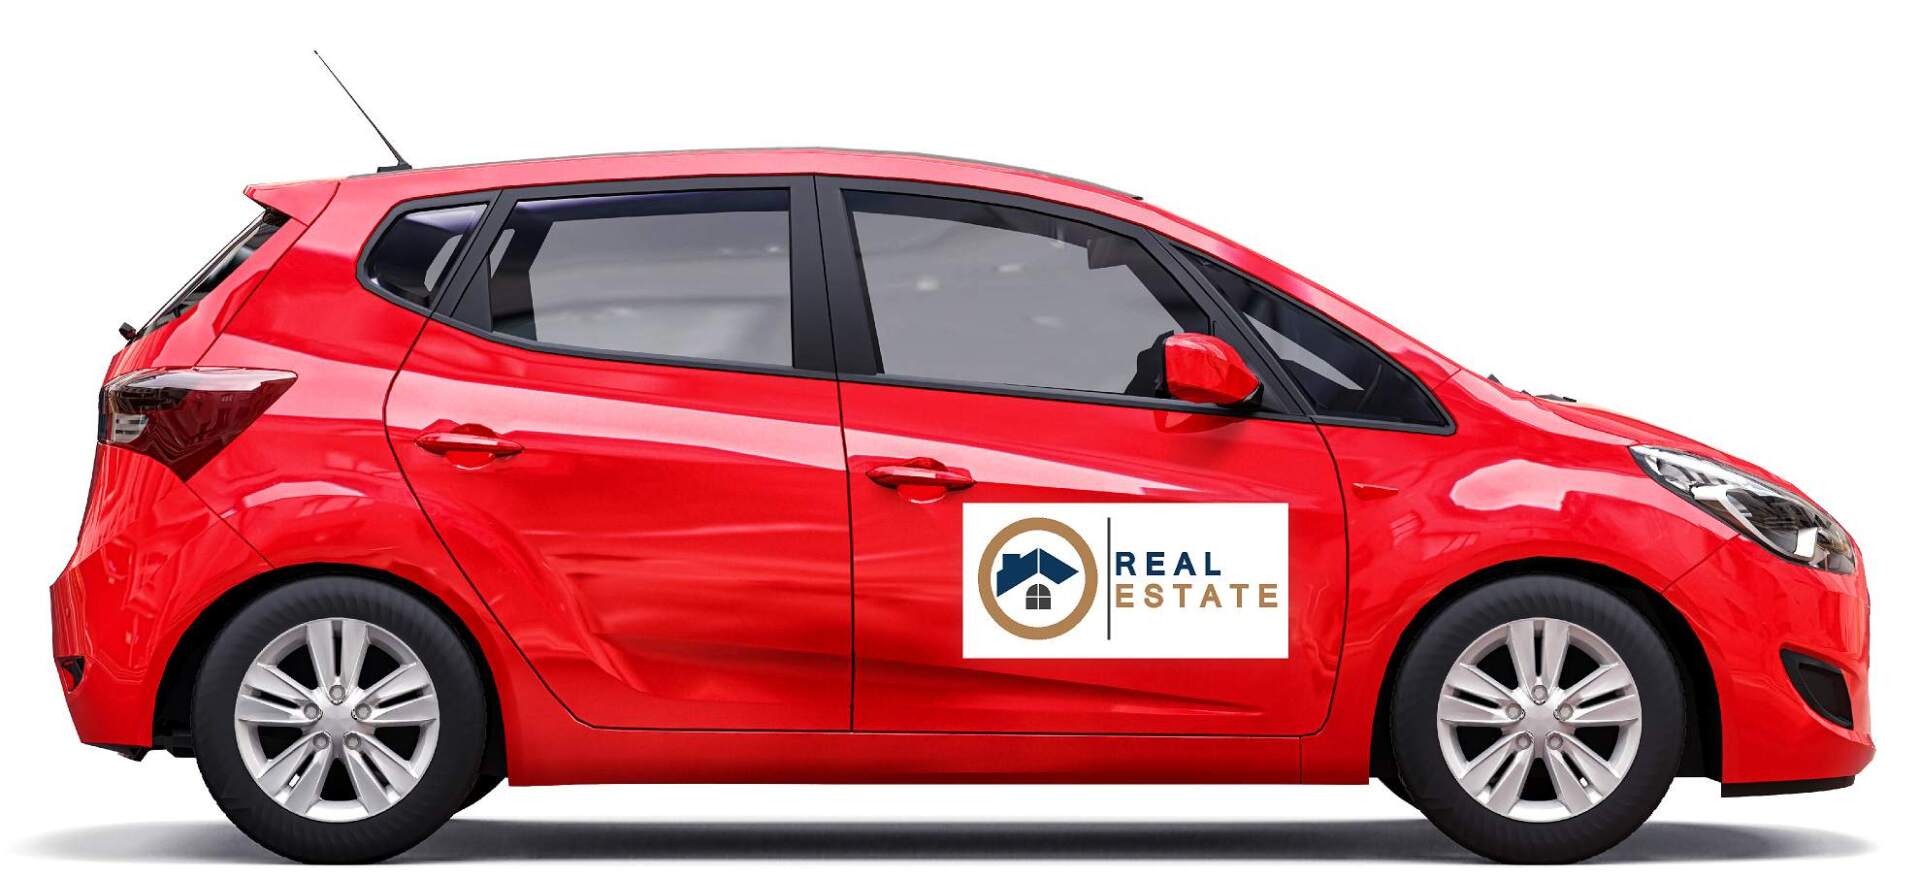 A red car with a real estate sticker on the side of it.